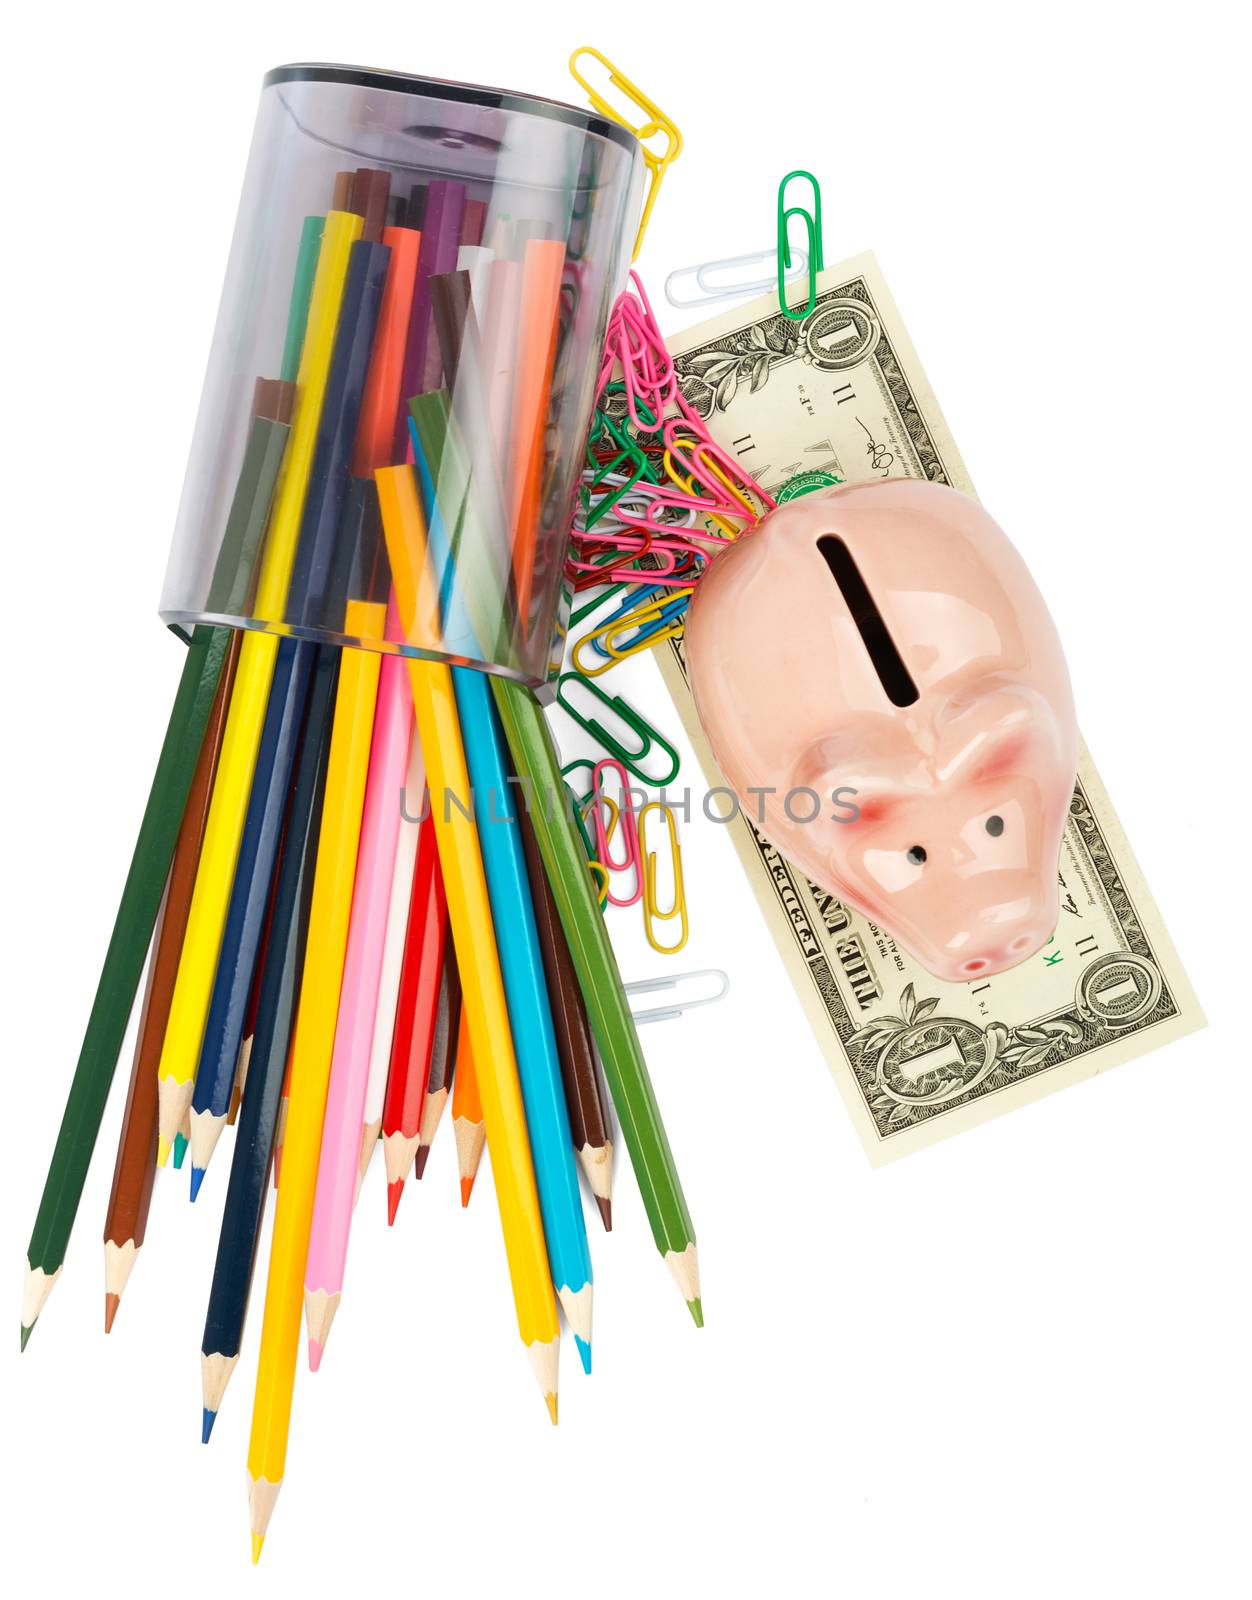 Piggy bank with crayons and paper clips on white background